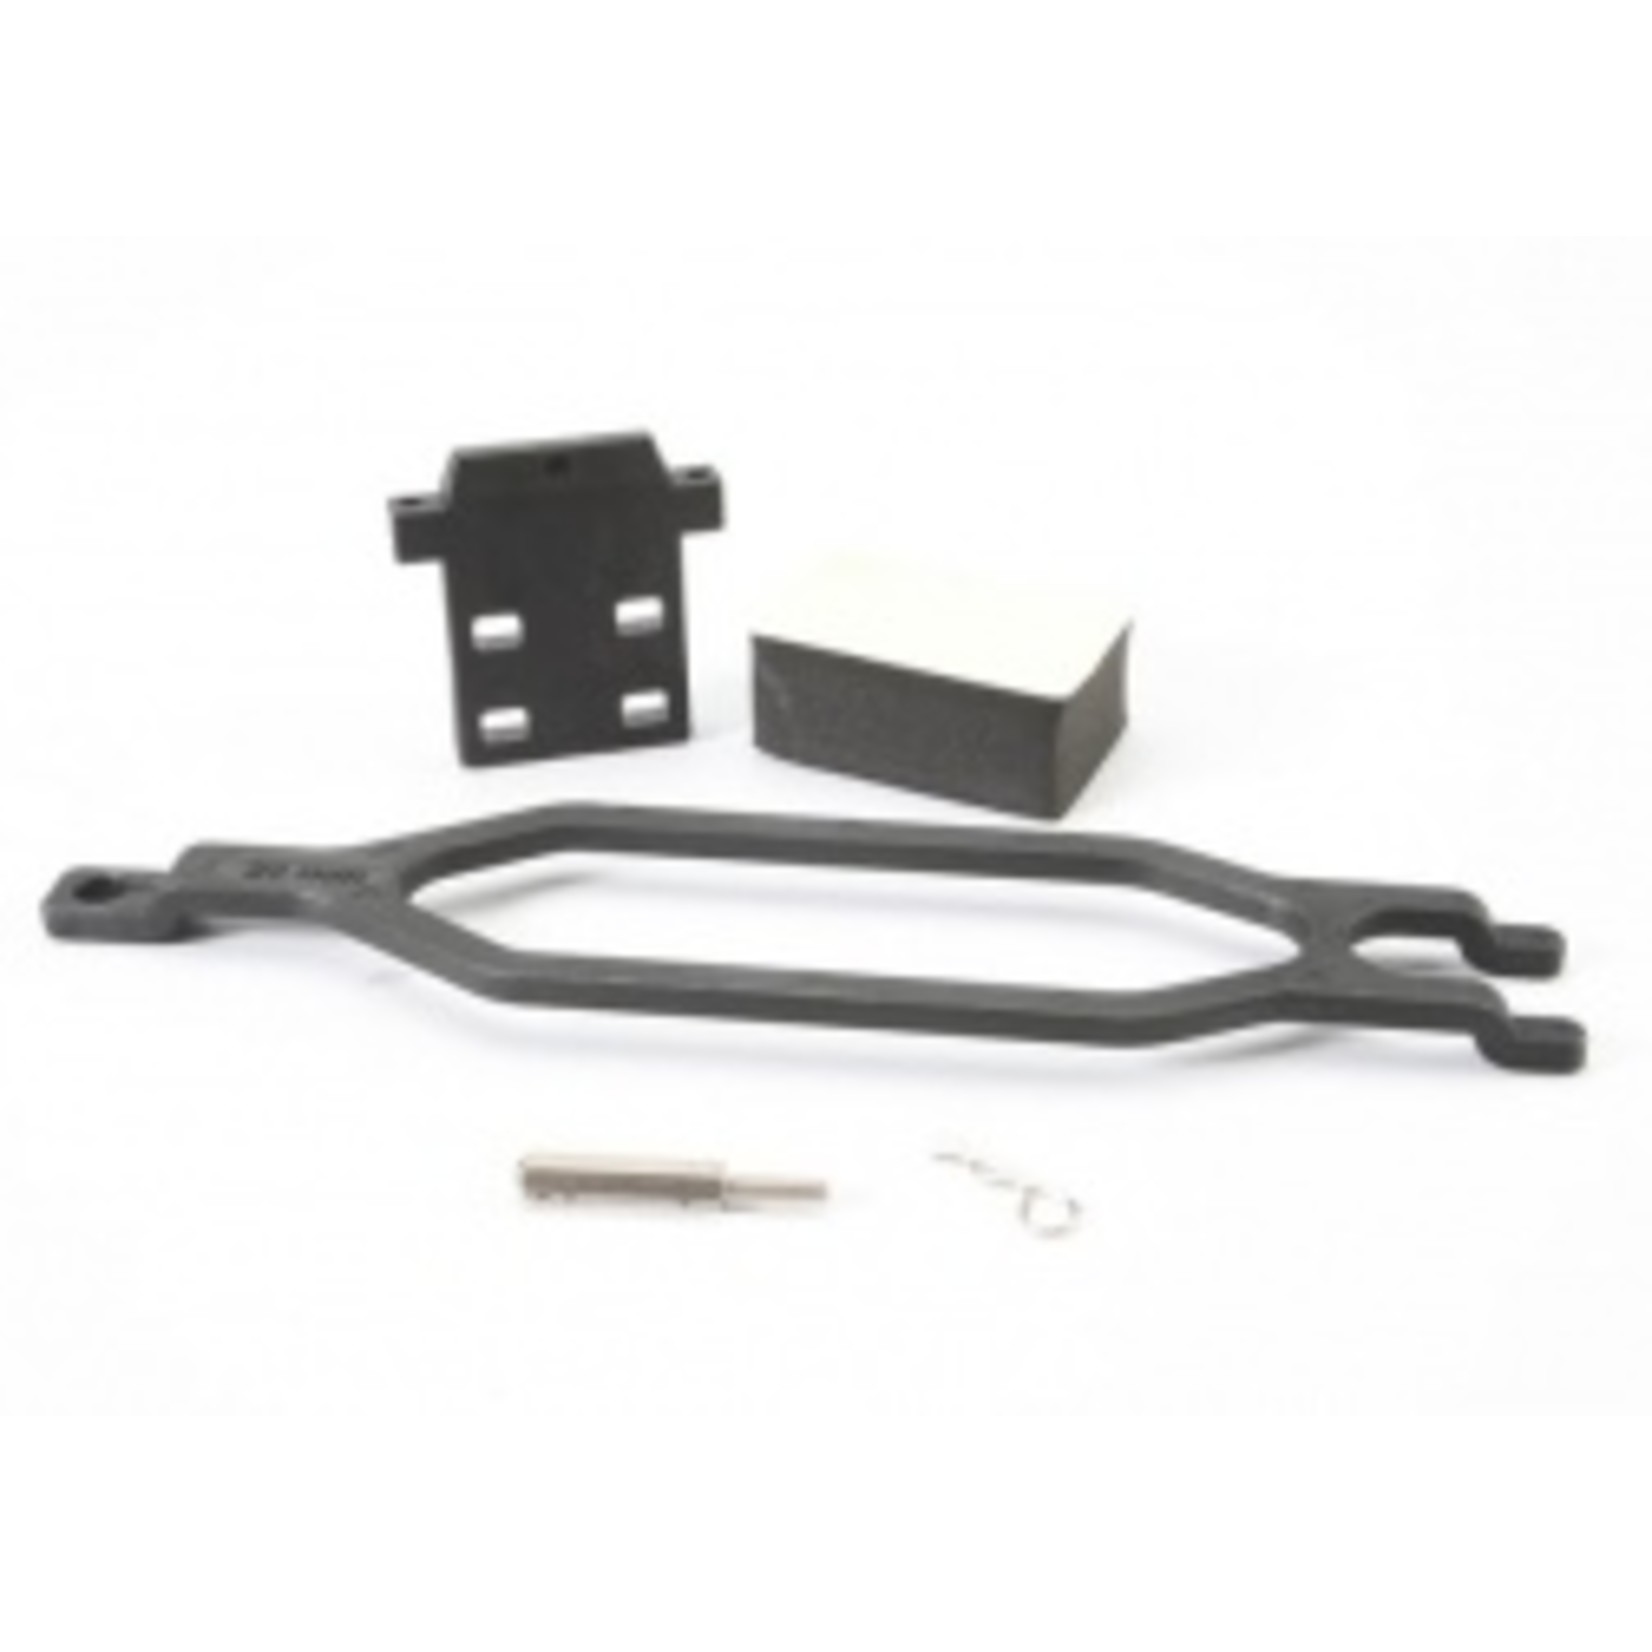 Traxxas Hold down, battery/ hold down retainer/ battery post/ foam spacer/ angled body clip (allows for installation of taller, multi-cell batteries)